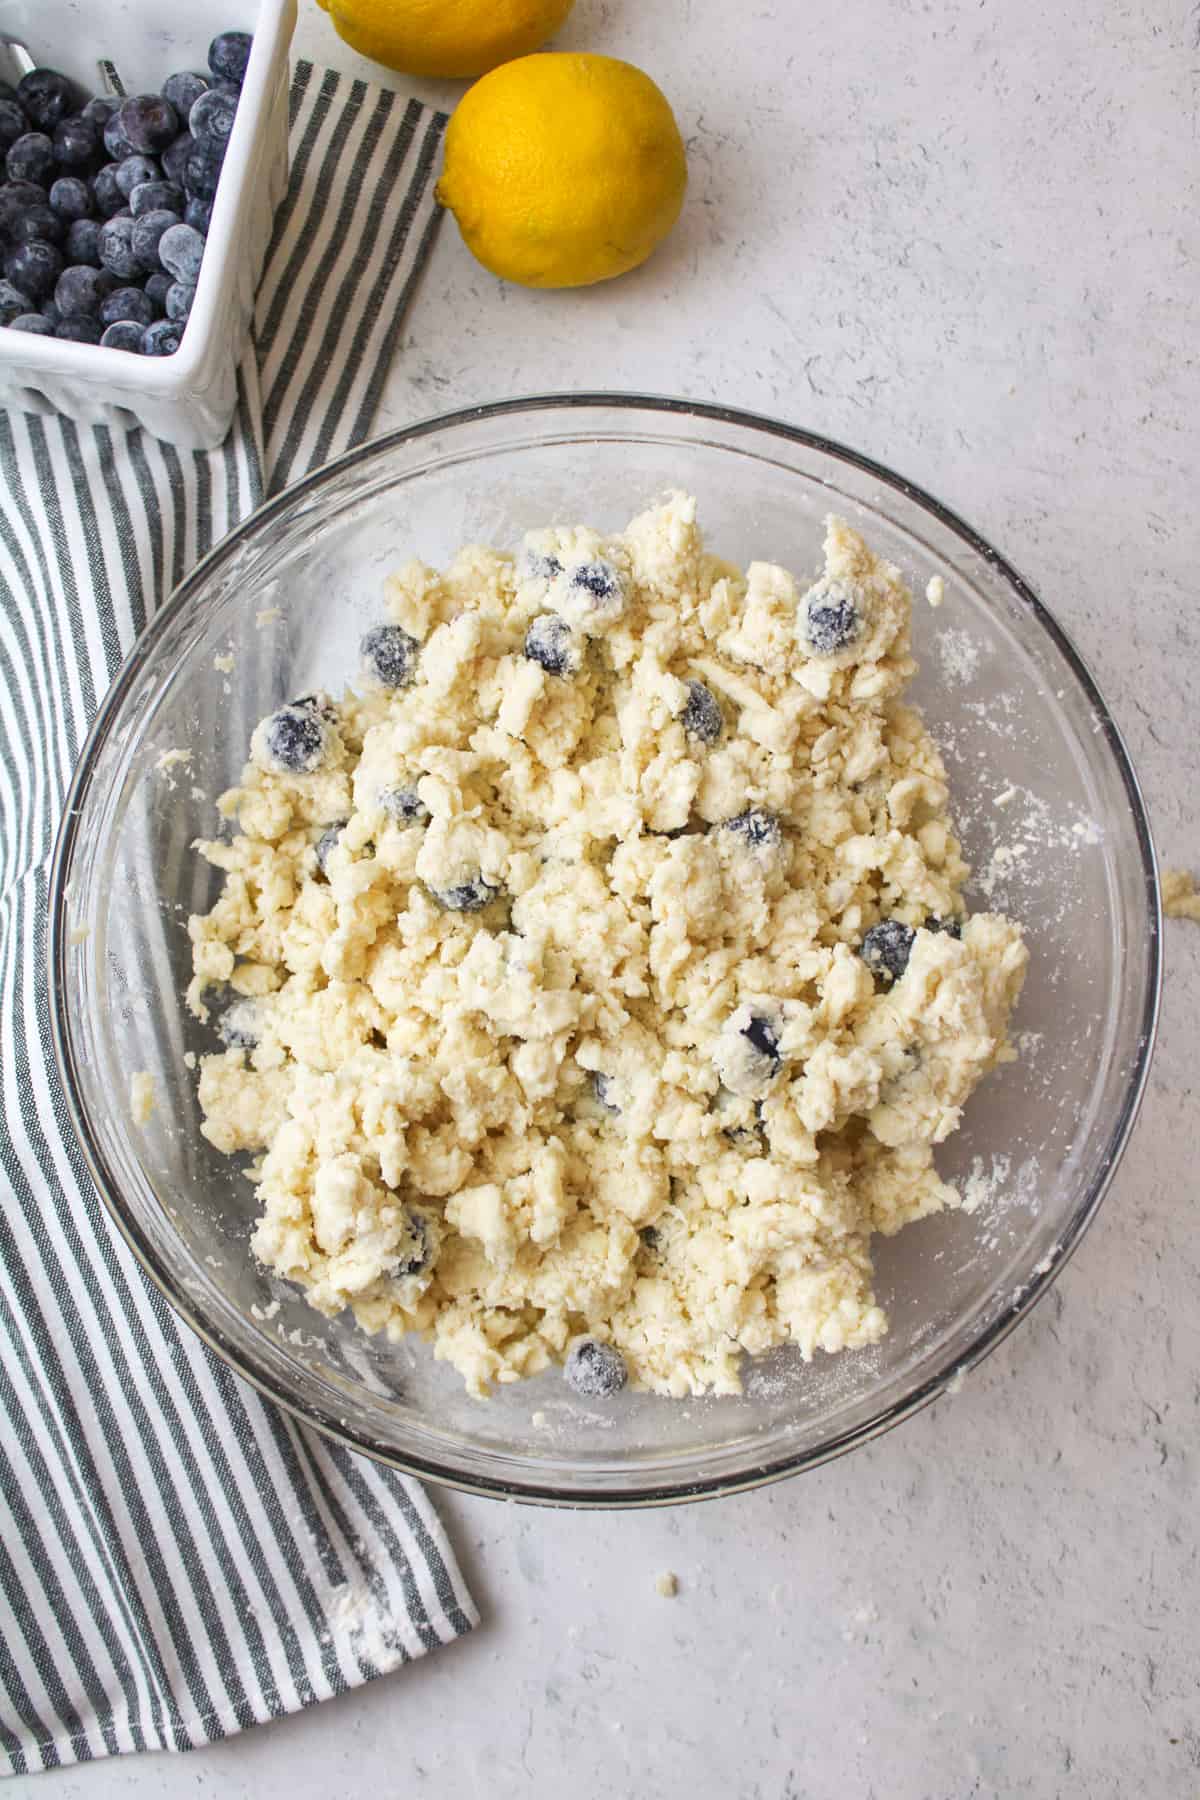 wet blueberry scone mixture in a mixing bowl